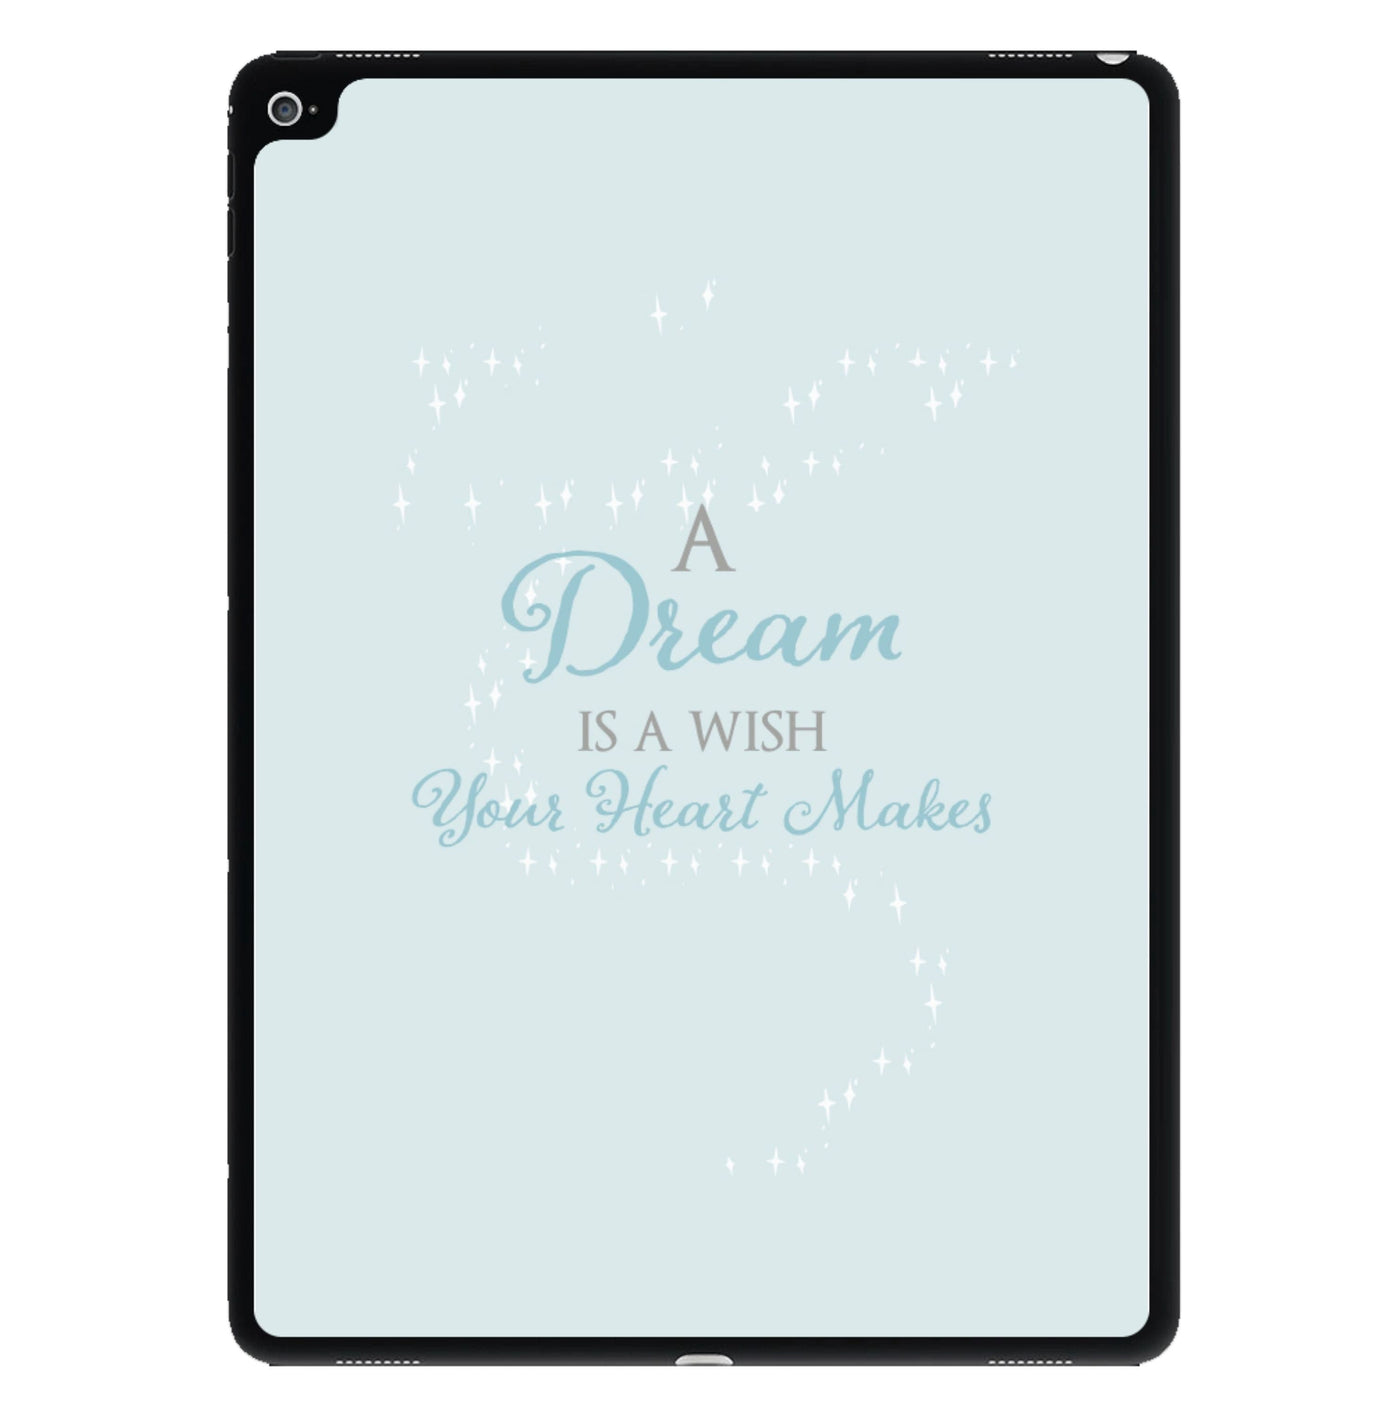 A Dream Is A Wish Your Heart Makes - Disney iPad Case